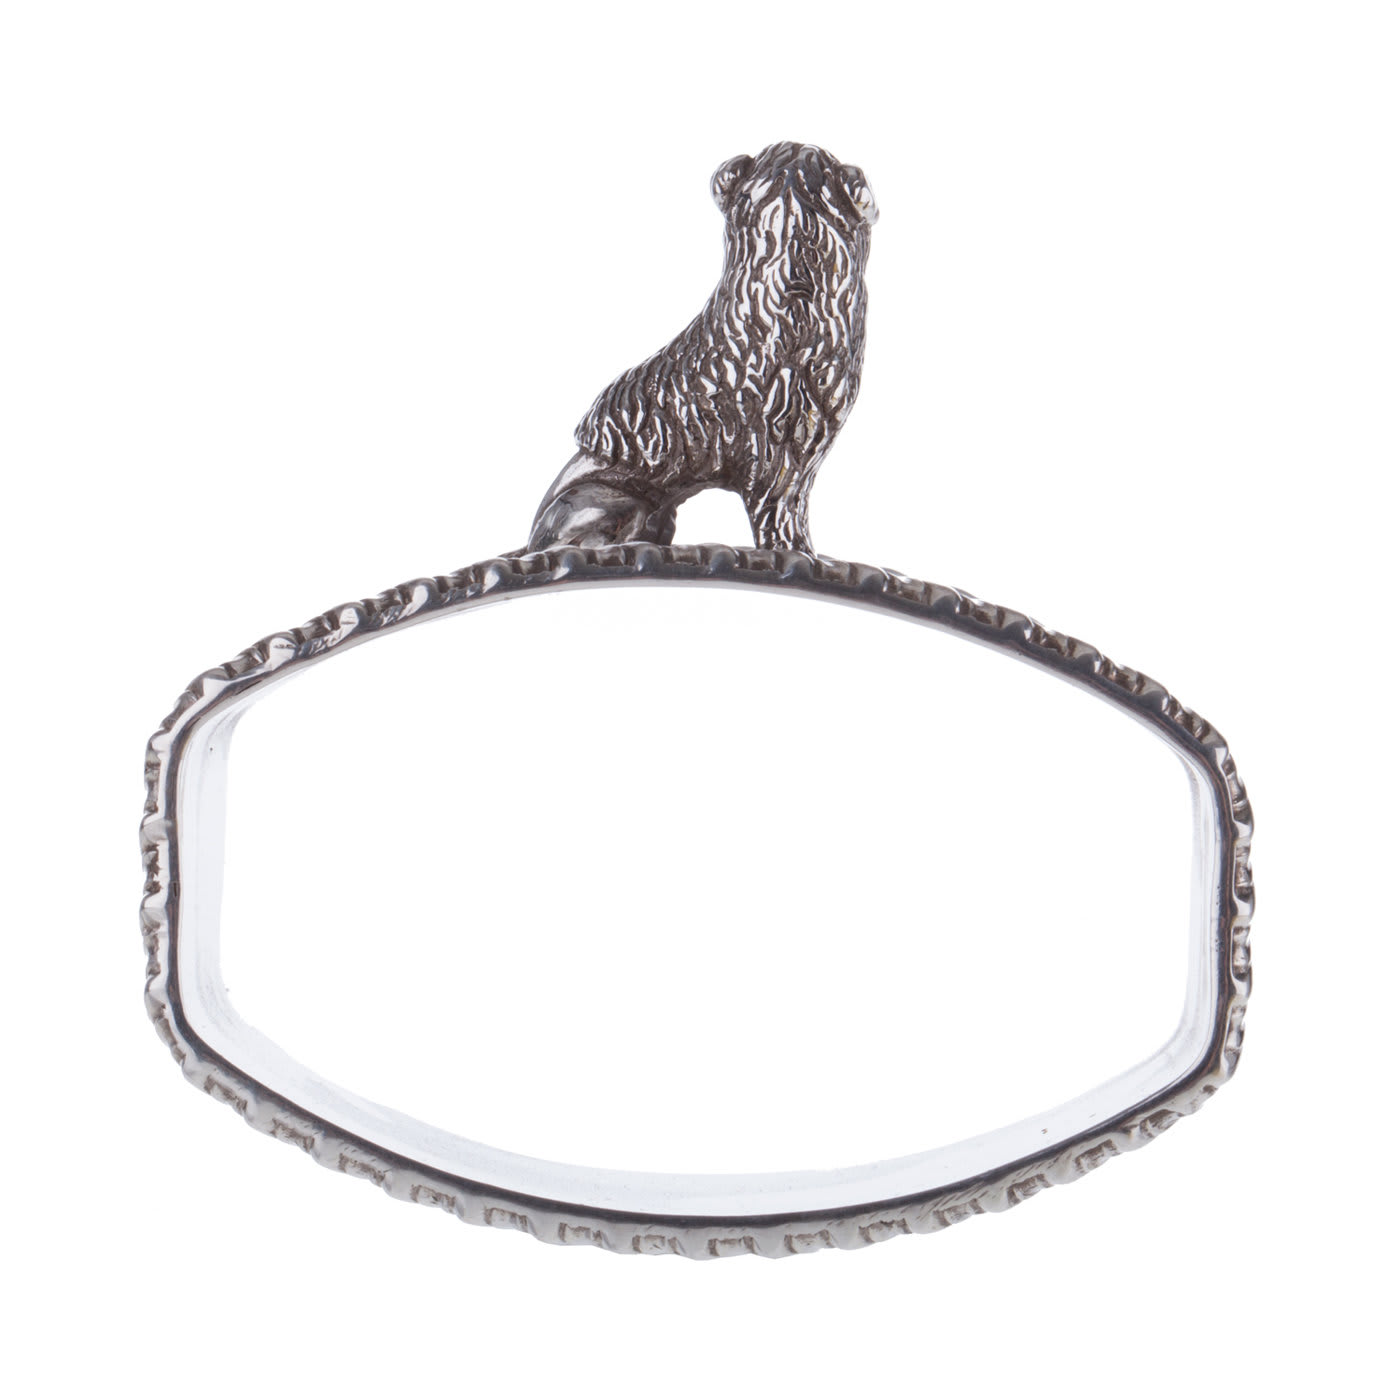 Poodle Sterling Silver Napkin Holder - Argentiere Pagliai